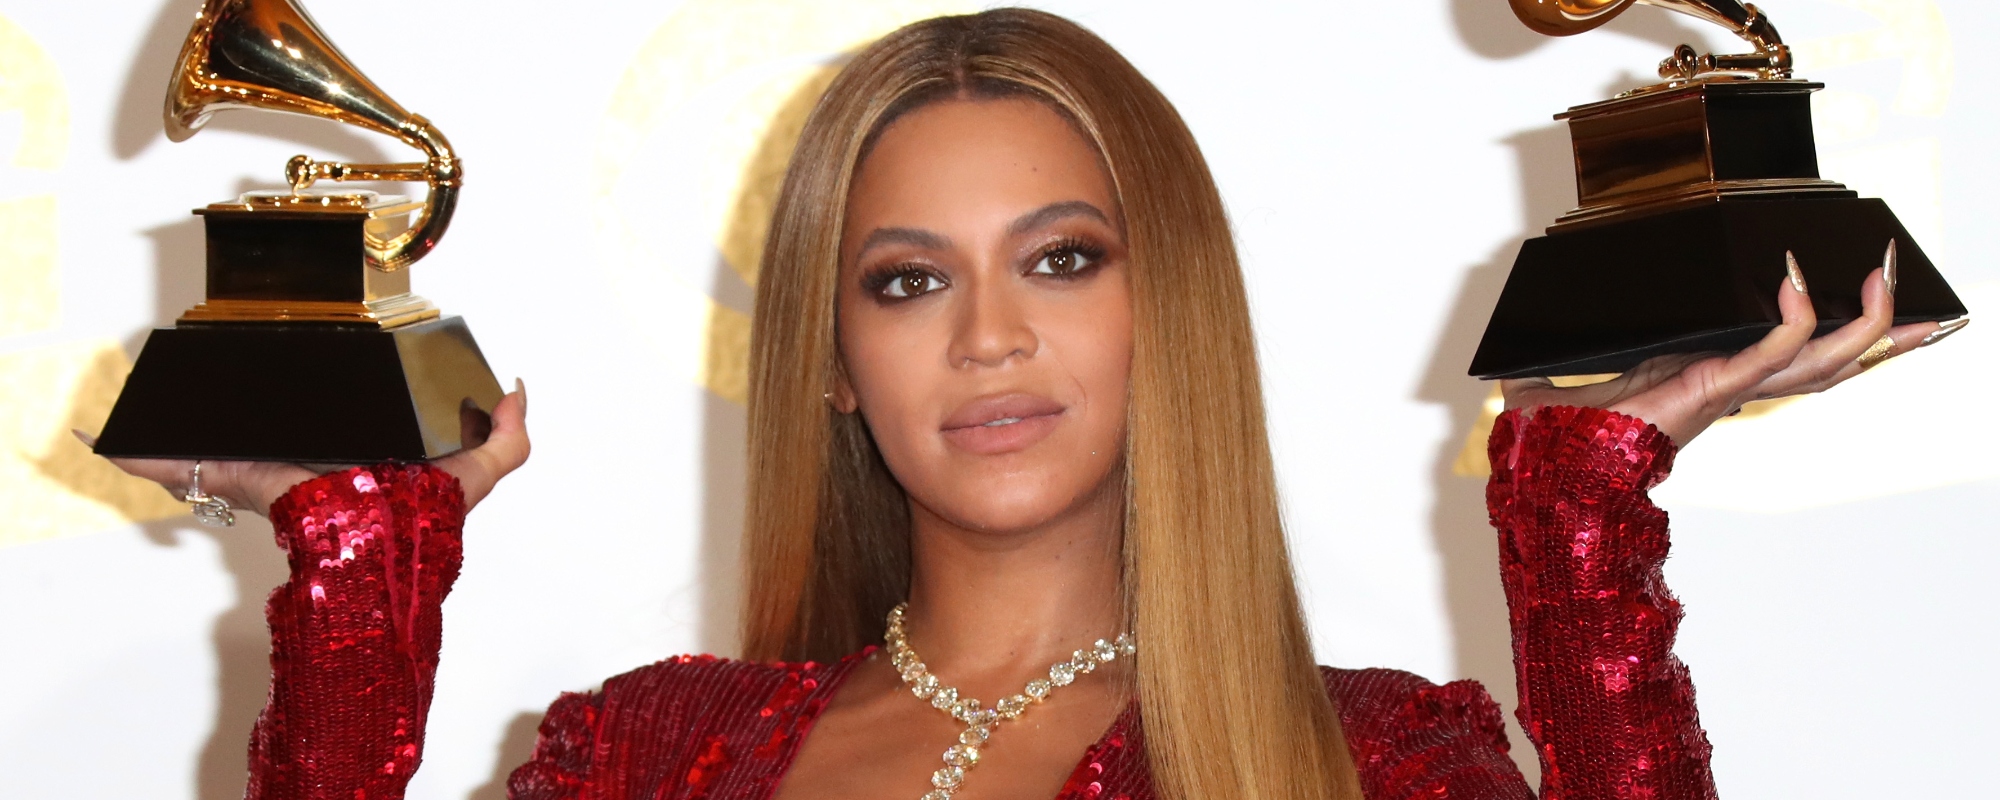 Beyoncé’s New Album is Bringing Attention to Black Female Country Artists Changing the Genre